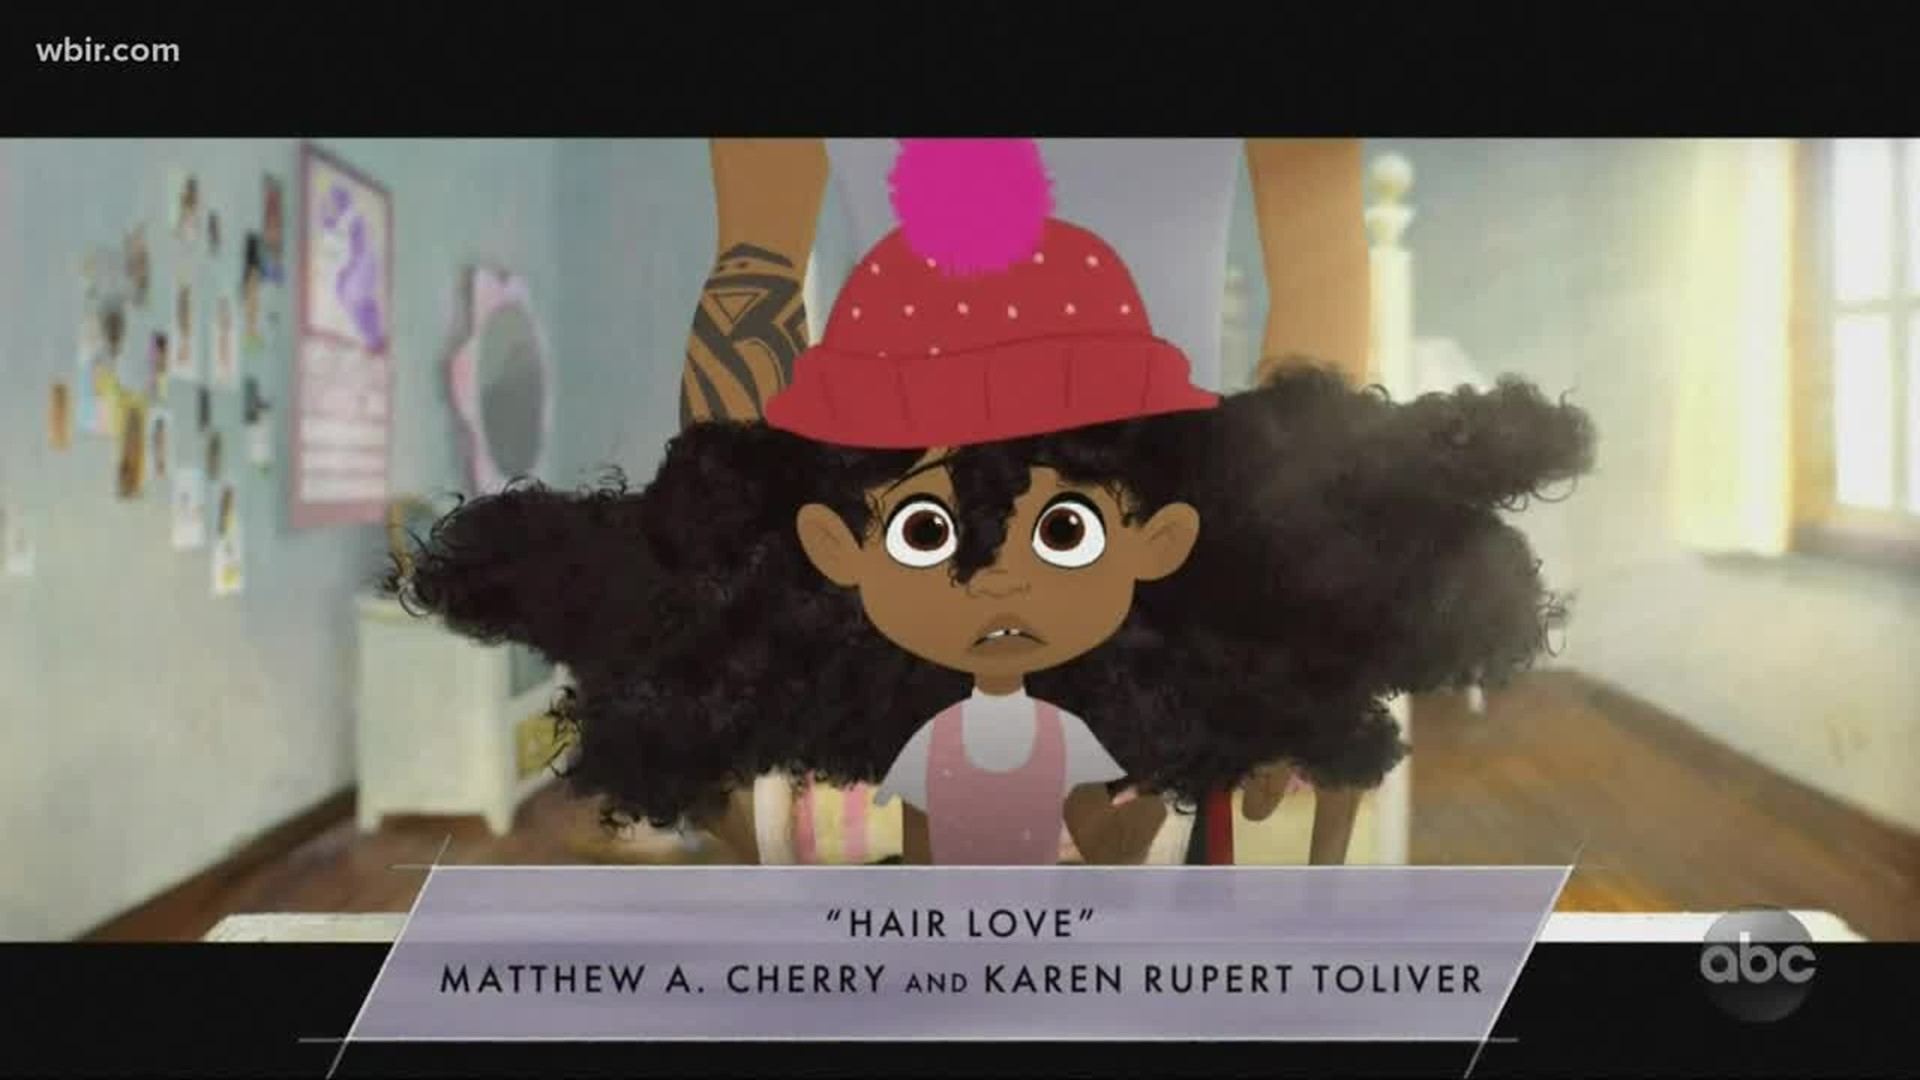 'Hair Love' won the Academy Award for best animated short film. But it also sparked conversation about the CROWN Act, a bill introduced right here in Tennessee.